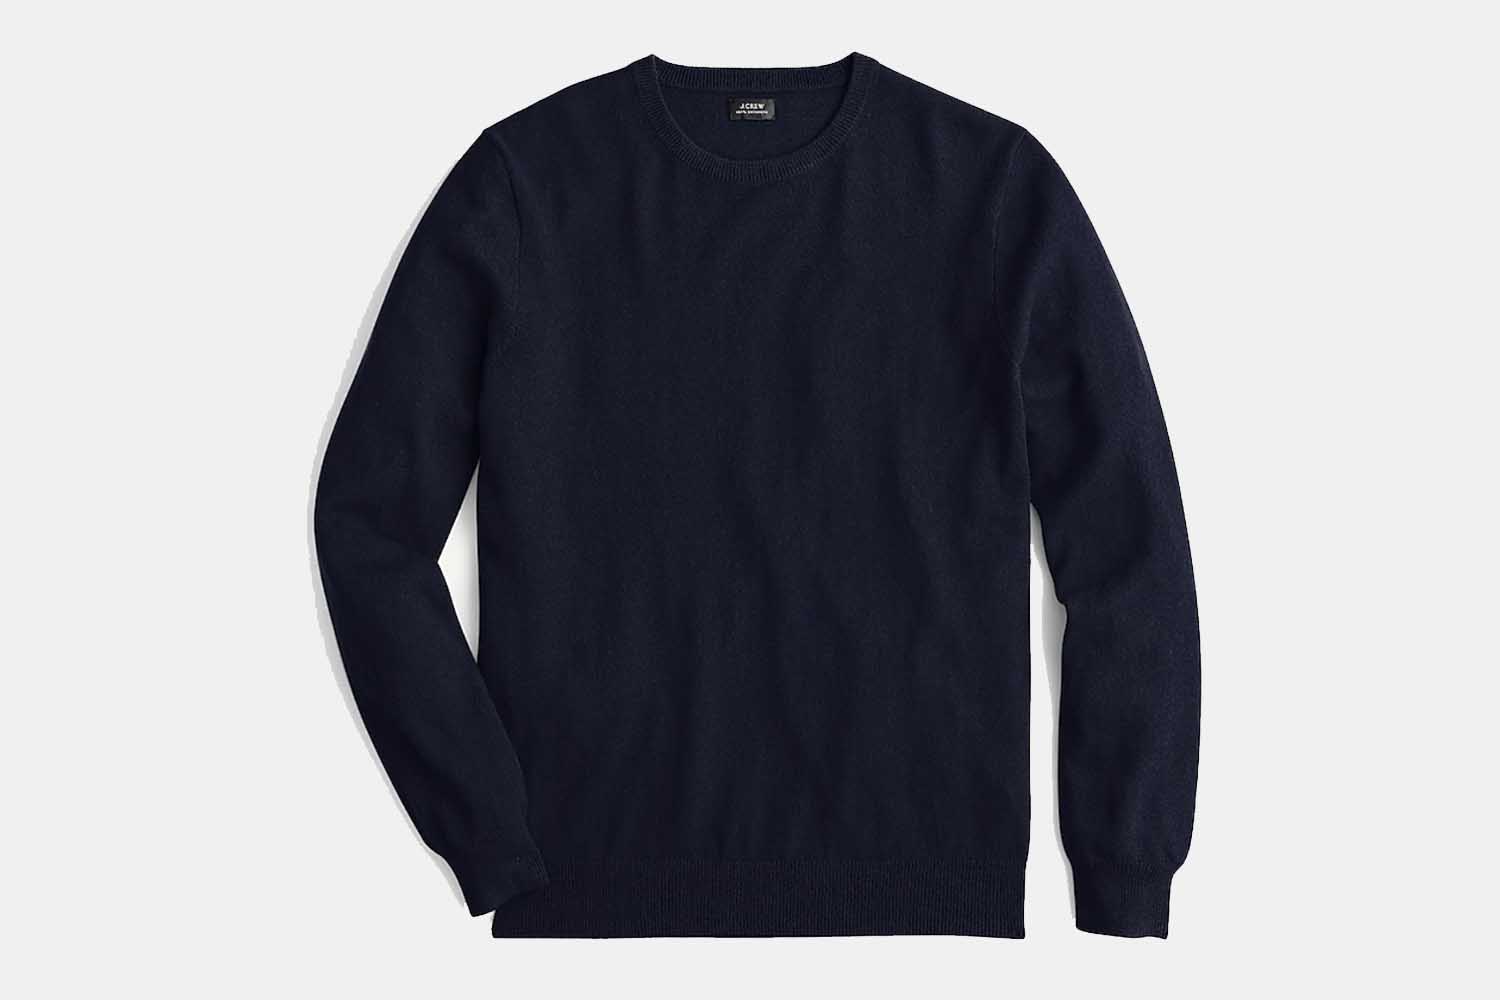 Save Up to 60% on Cashmere Menswear at J.Crew - InsideHook